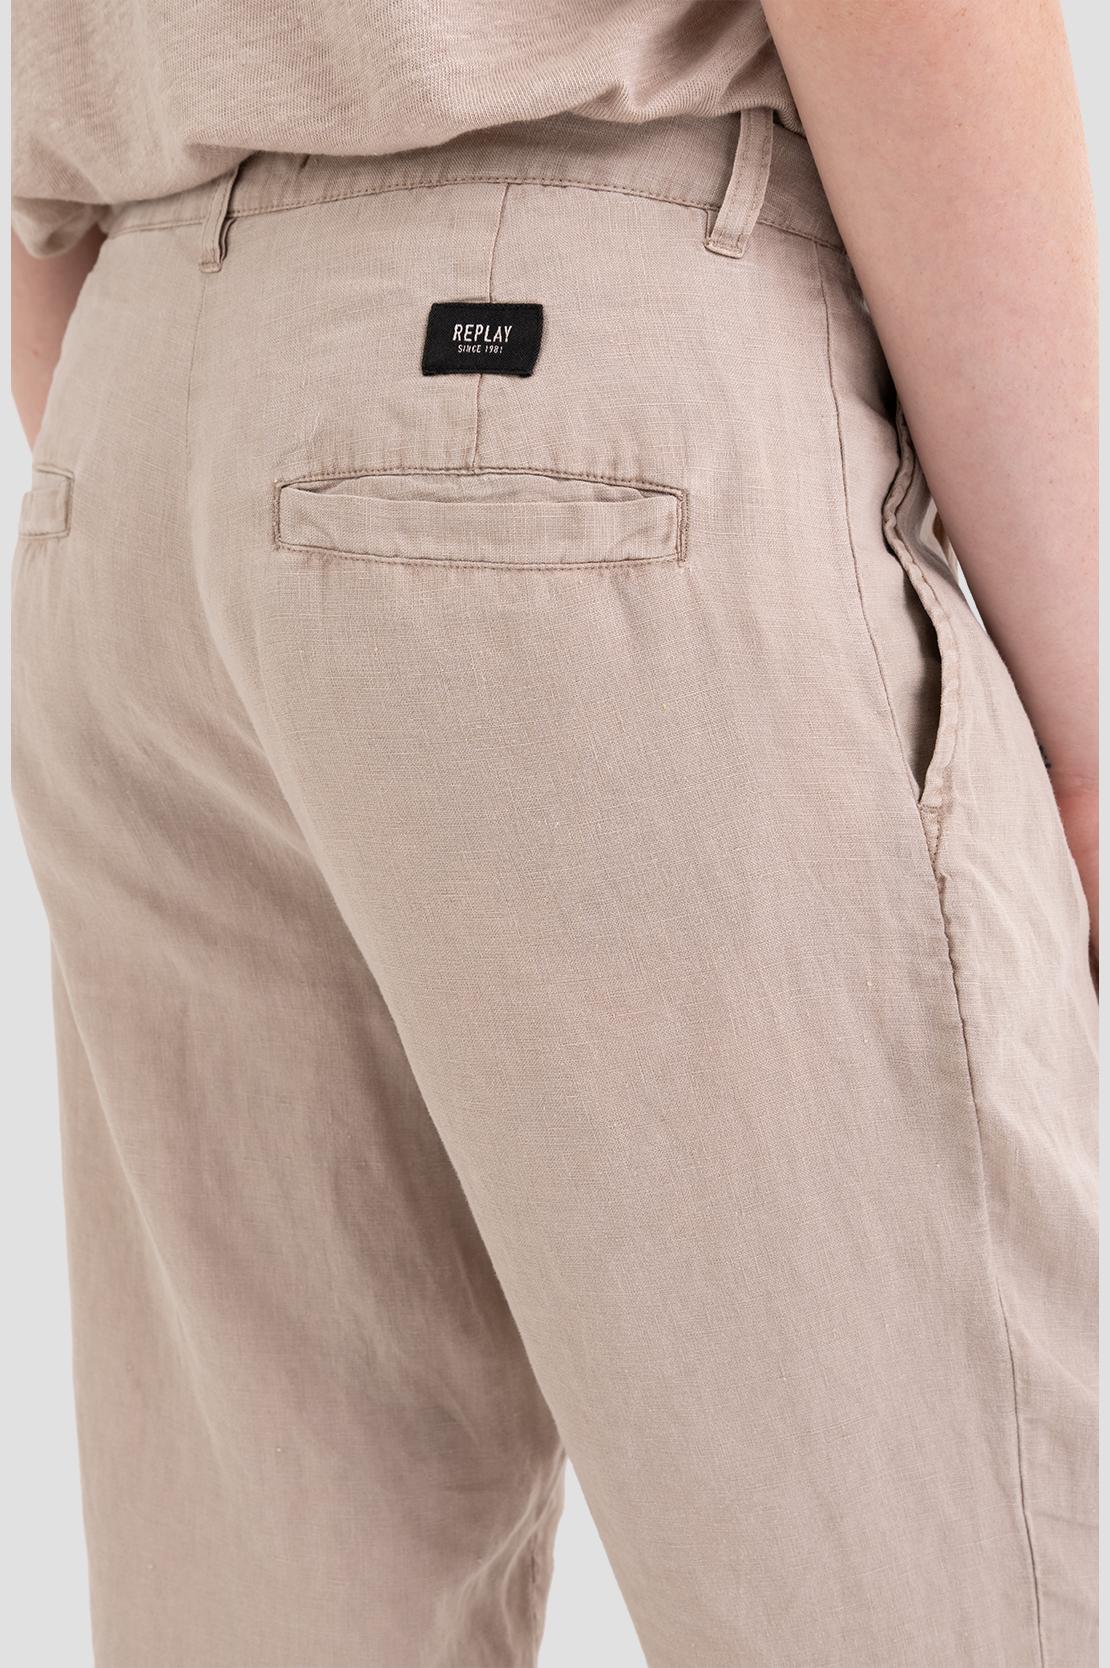 Replay Trousers for men - Buy now at Boozt.com